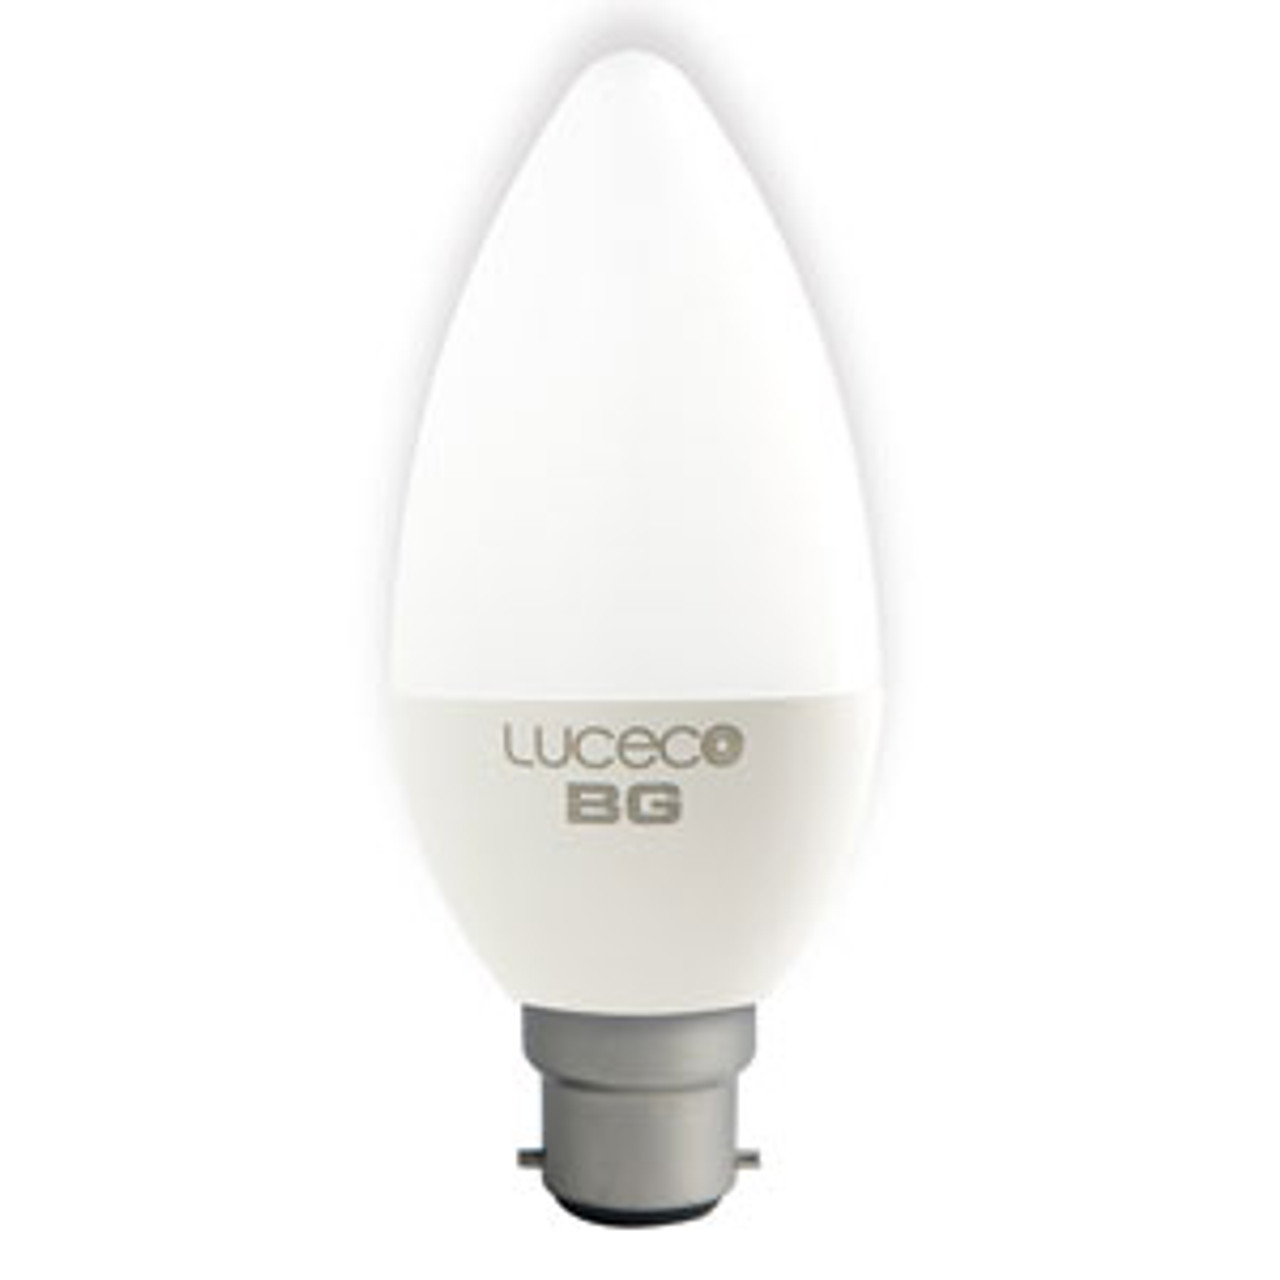 Nexus LUCECO LED Candle 3.5W Very Warm White BC